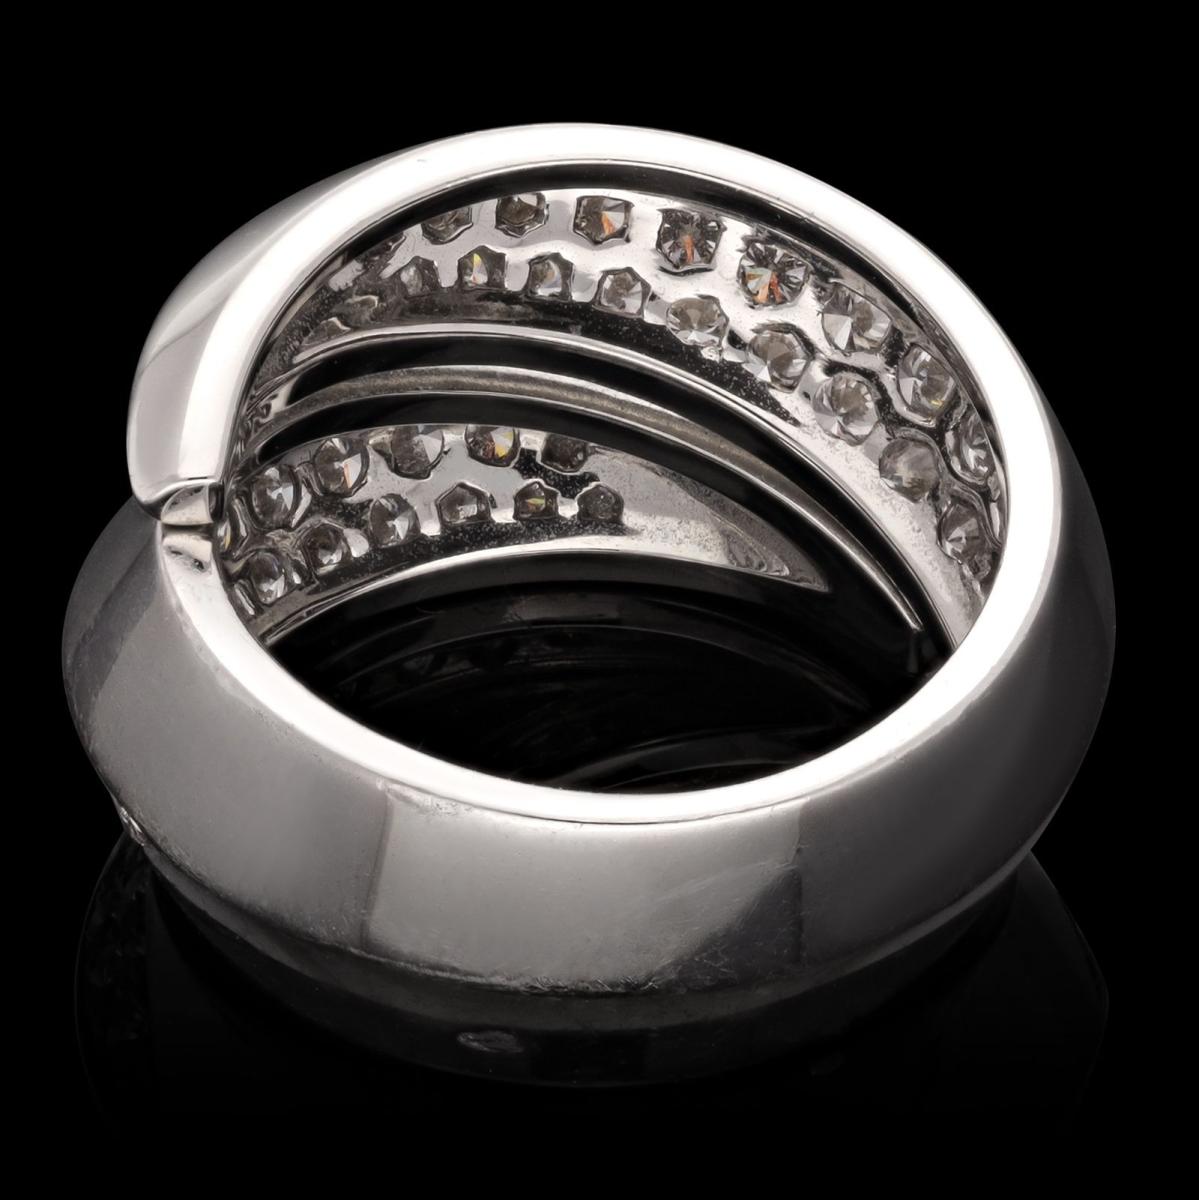 Cartier Panthère Griffe 18ct White Gold And Diamond Crossover Ring